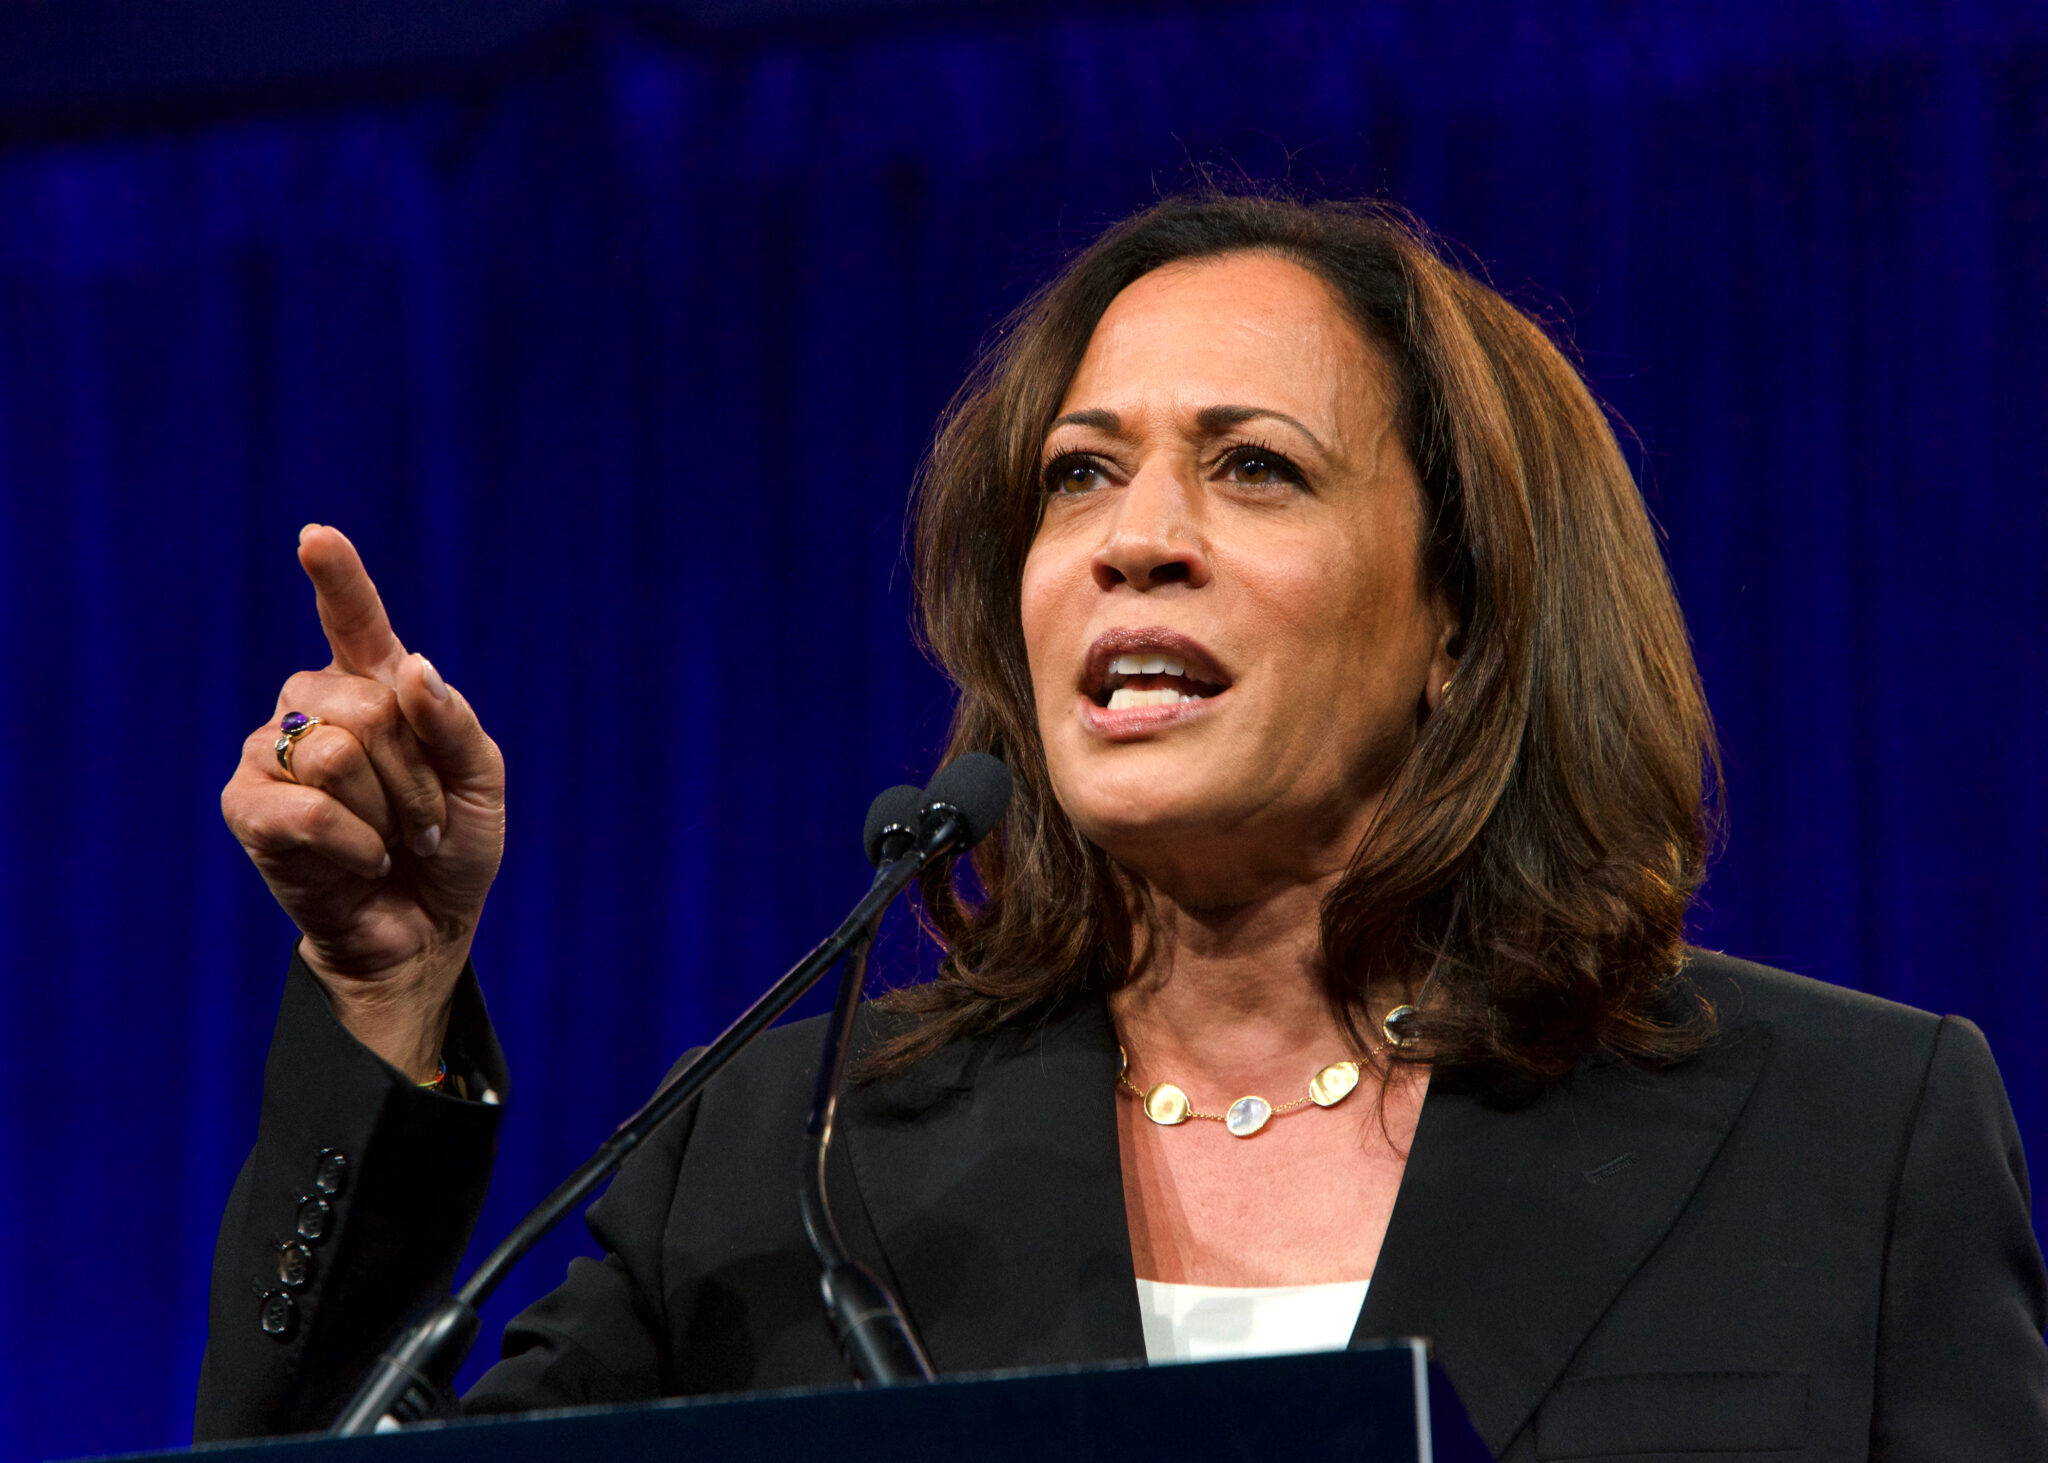 San Francisco, CA - August 23, 2019: Presidential candidate Kamala Harris speaking at the Democratic National Convention summer session in San Francisco, California.